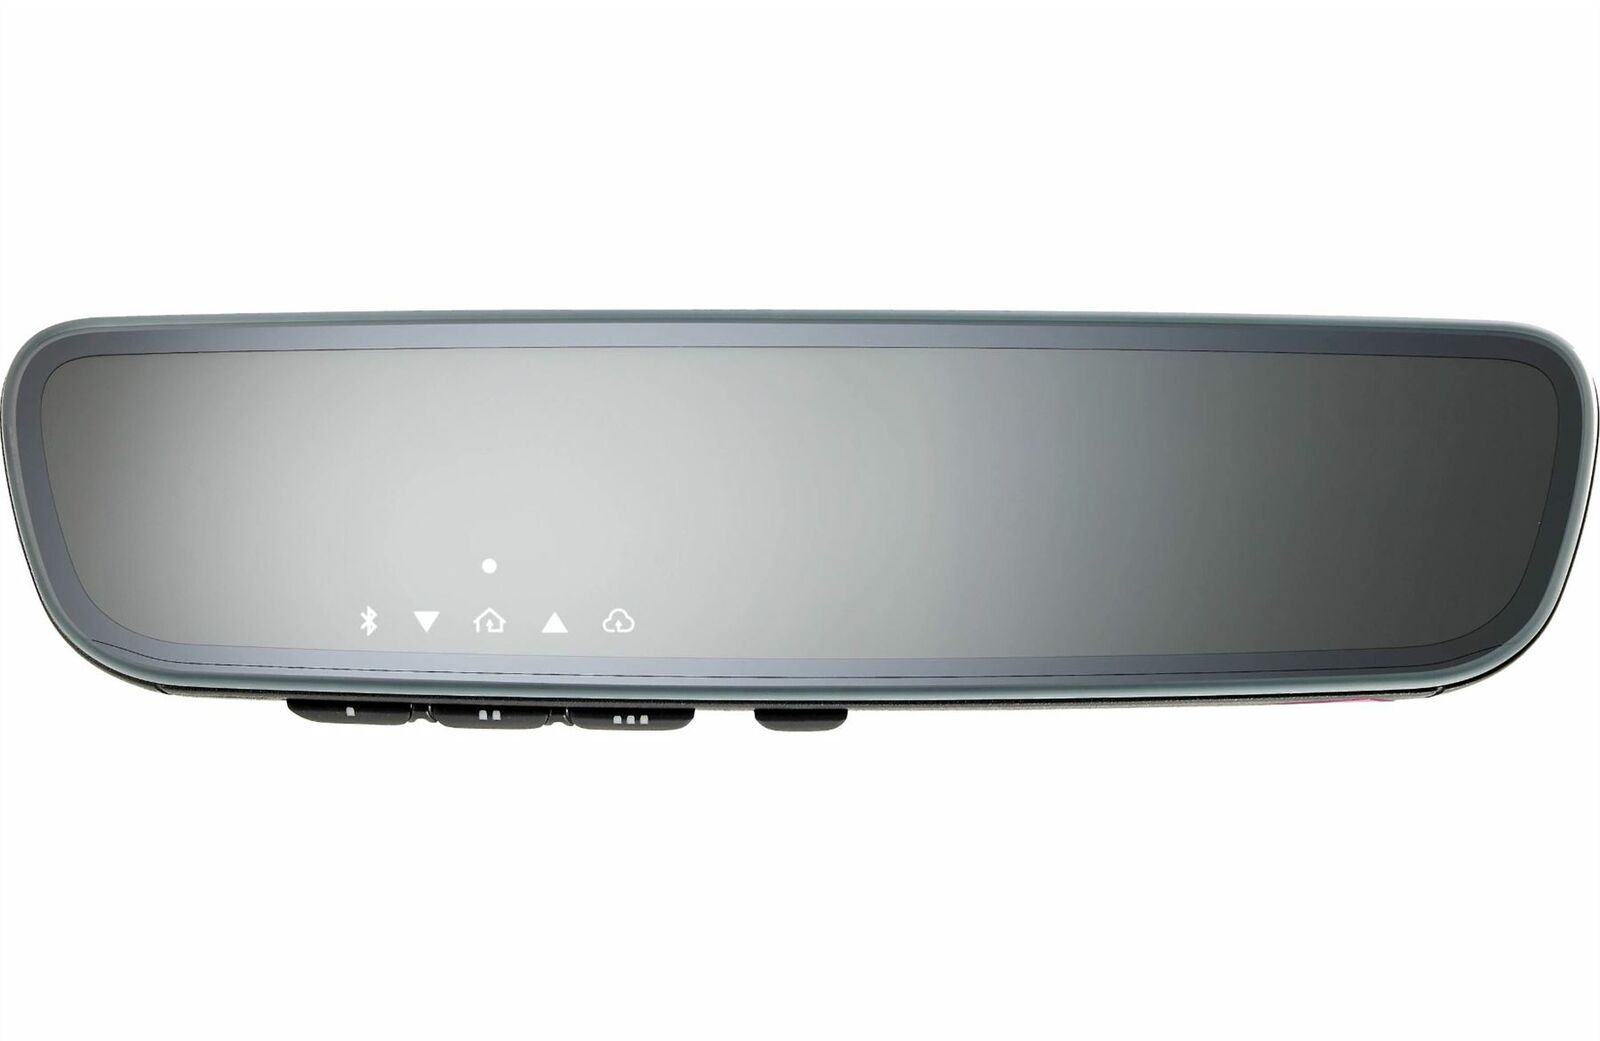 Gentex Advgenflchln Rear-view Mirror With Homelink Bluetooth-equipped